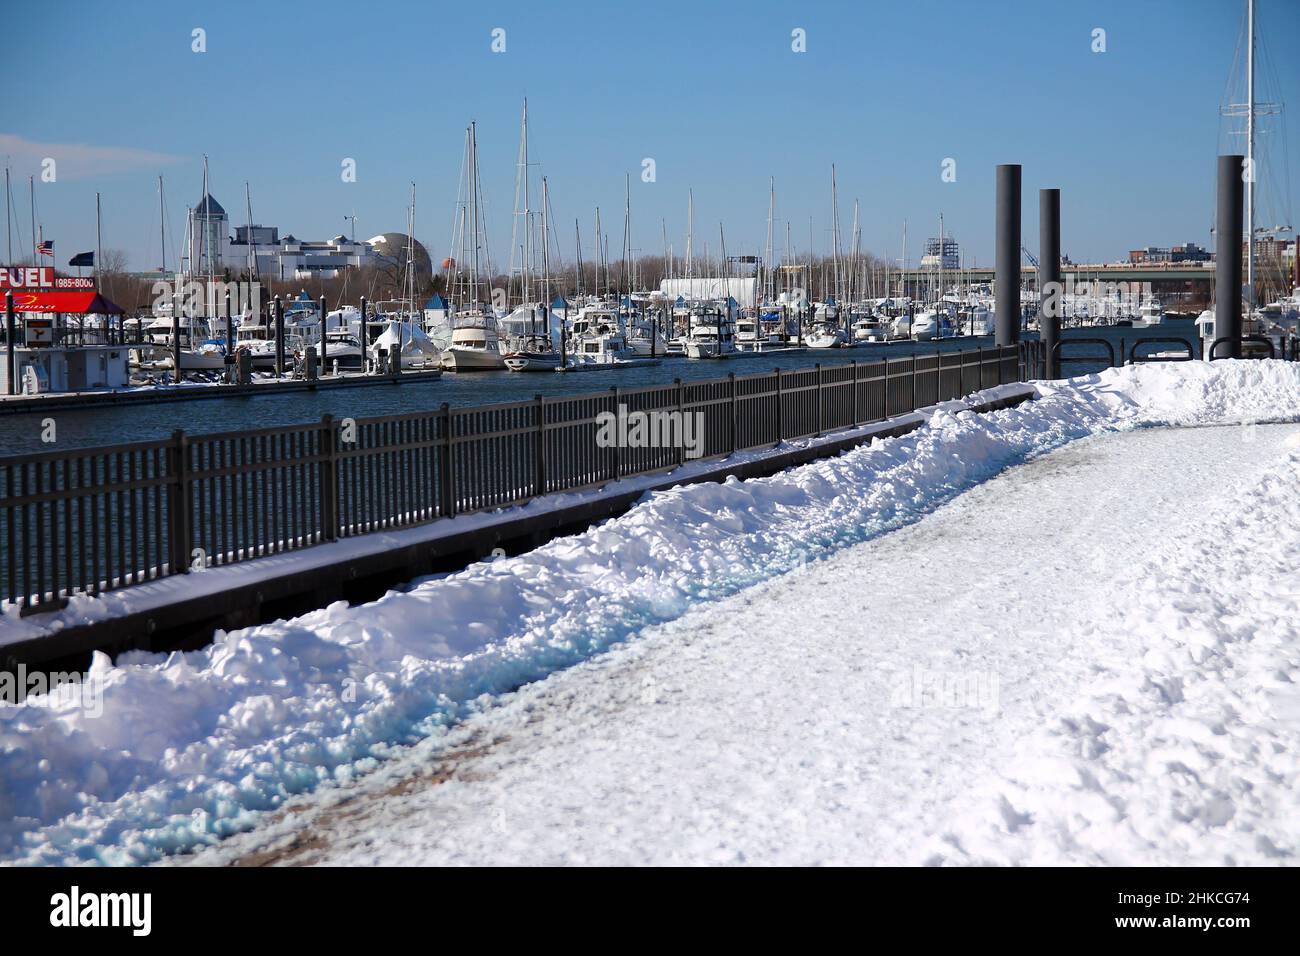 The path in the snow on the Morris Channel Basin Walkaway in Jersey City Stock Photo